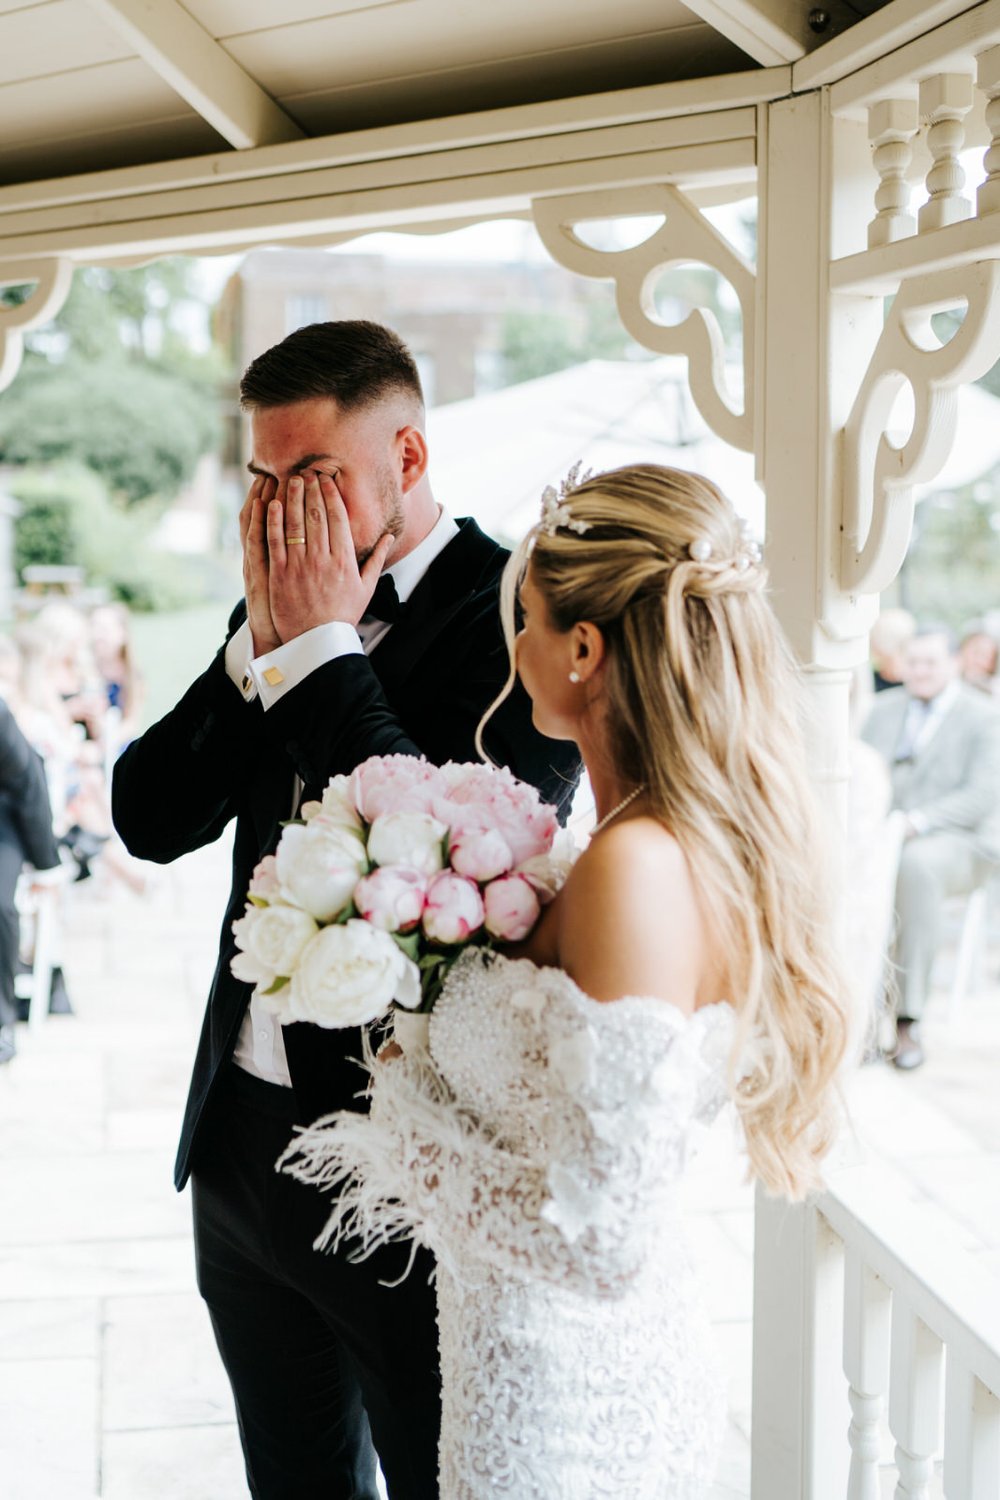 Groom covers his face while he cries after seeing bride in her wedding dress for the first time